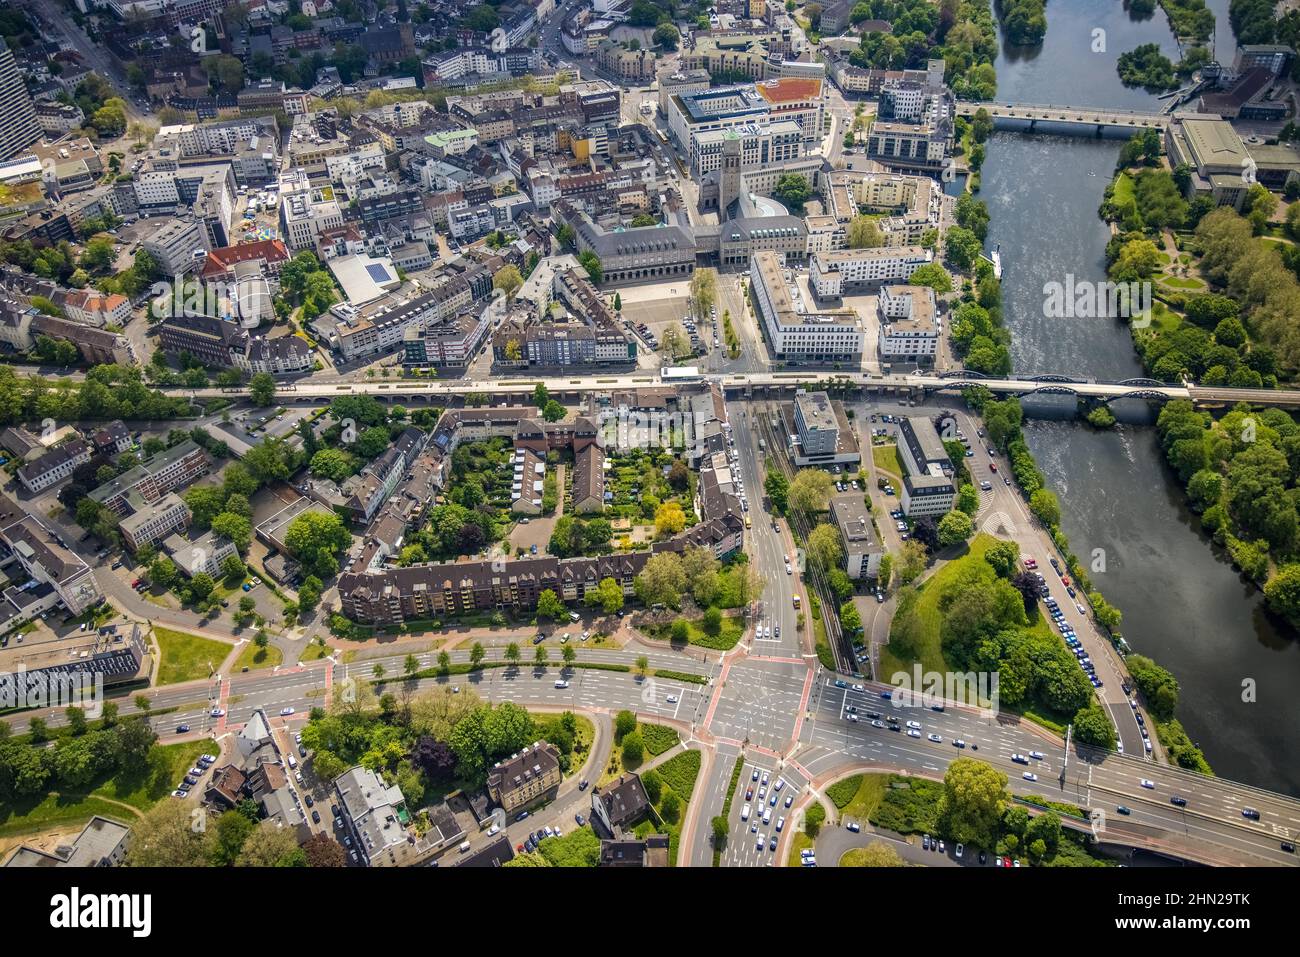 Aerial view, city hall, Ruhr promenade, city viaduct and Ruhr bridge on the river Ruhr, Old Town I, Mülheim an der Ruhr, Ruhr area, North Rhine-Westph Stock Photo